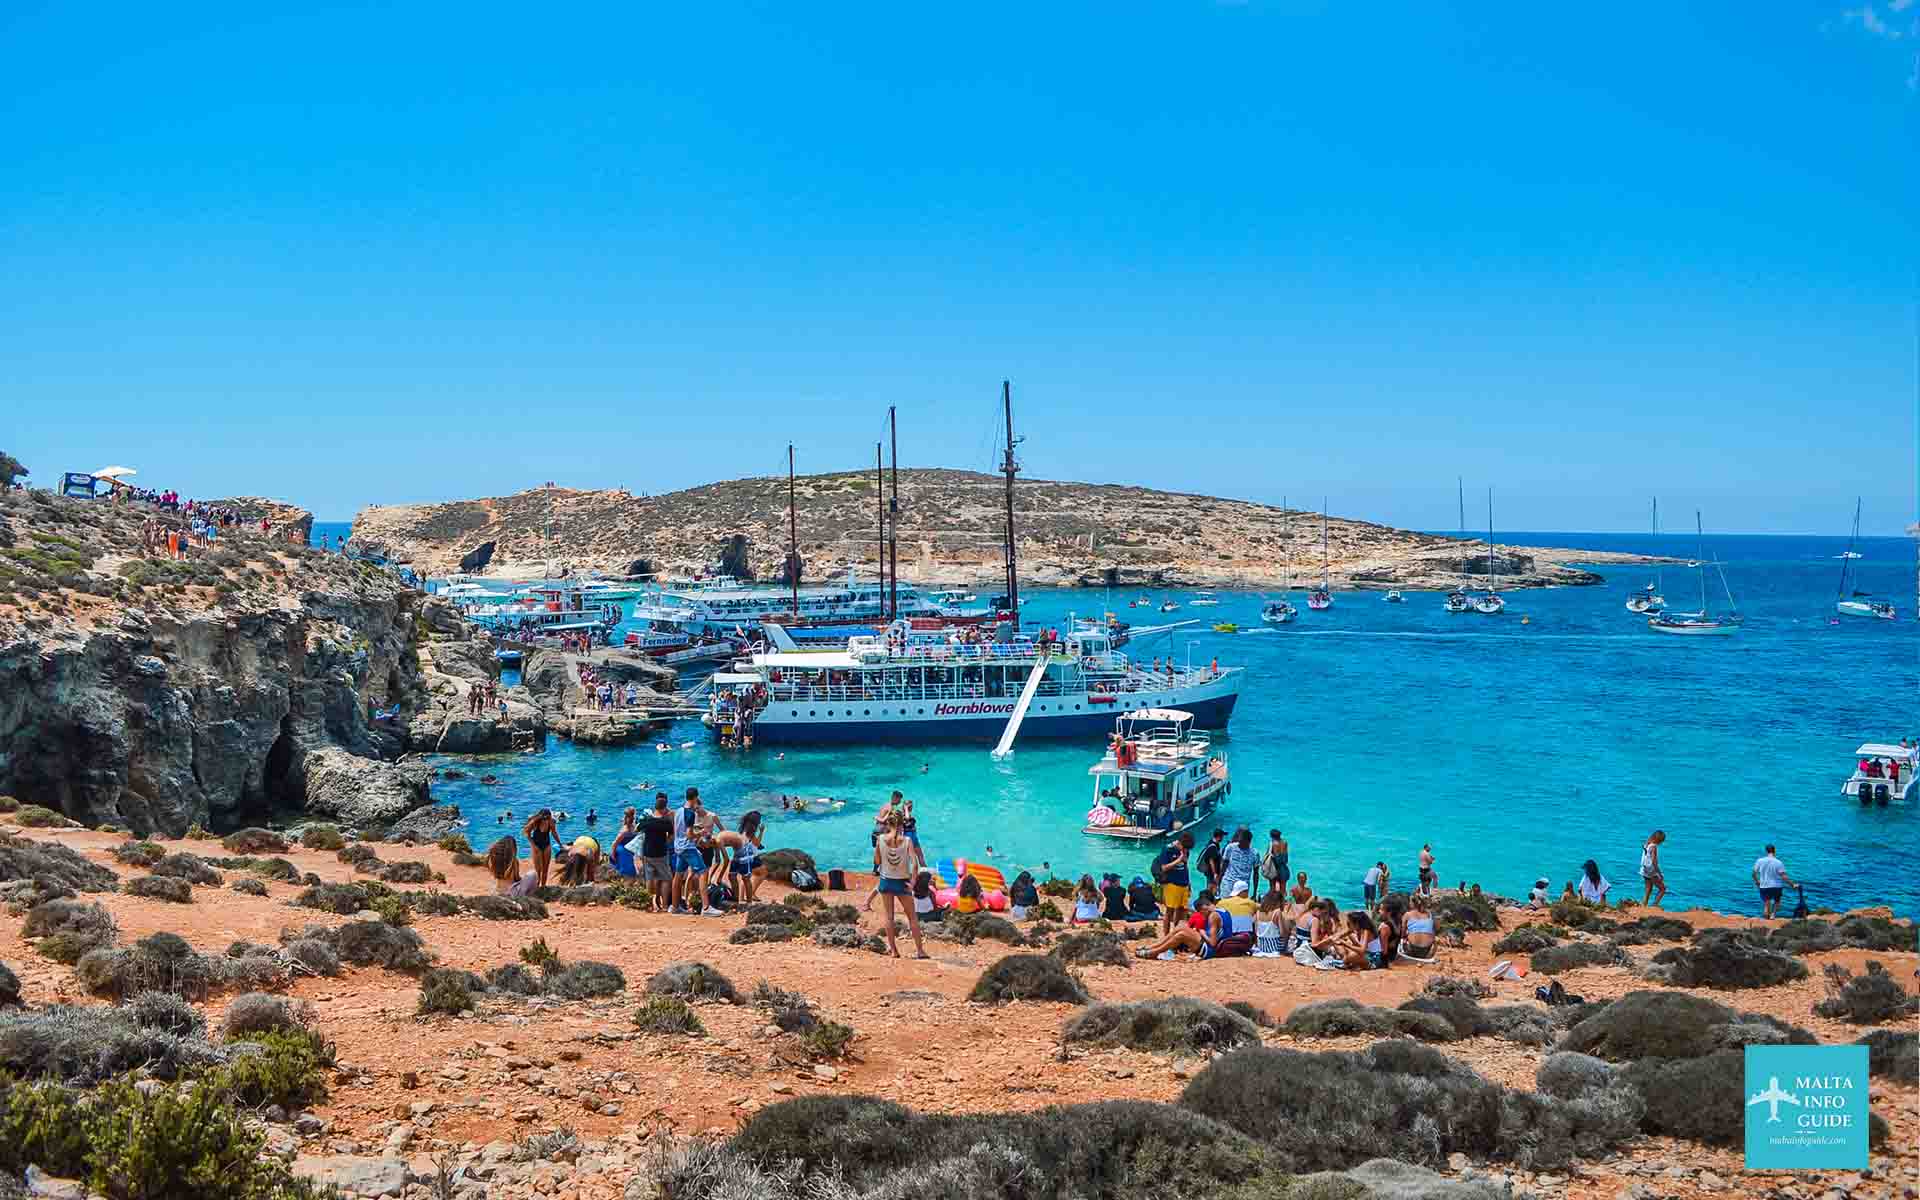 A view of the boats moored at Comino island